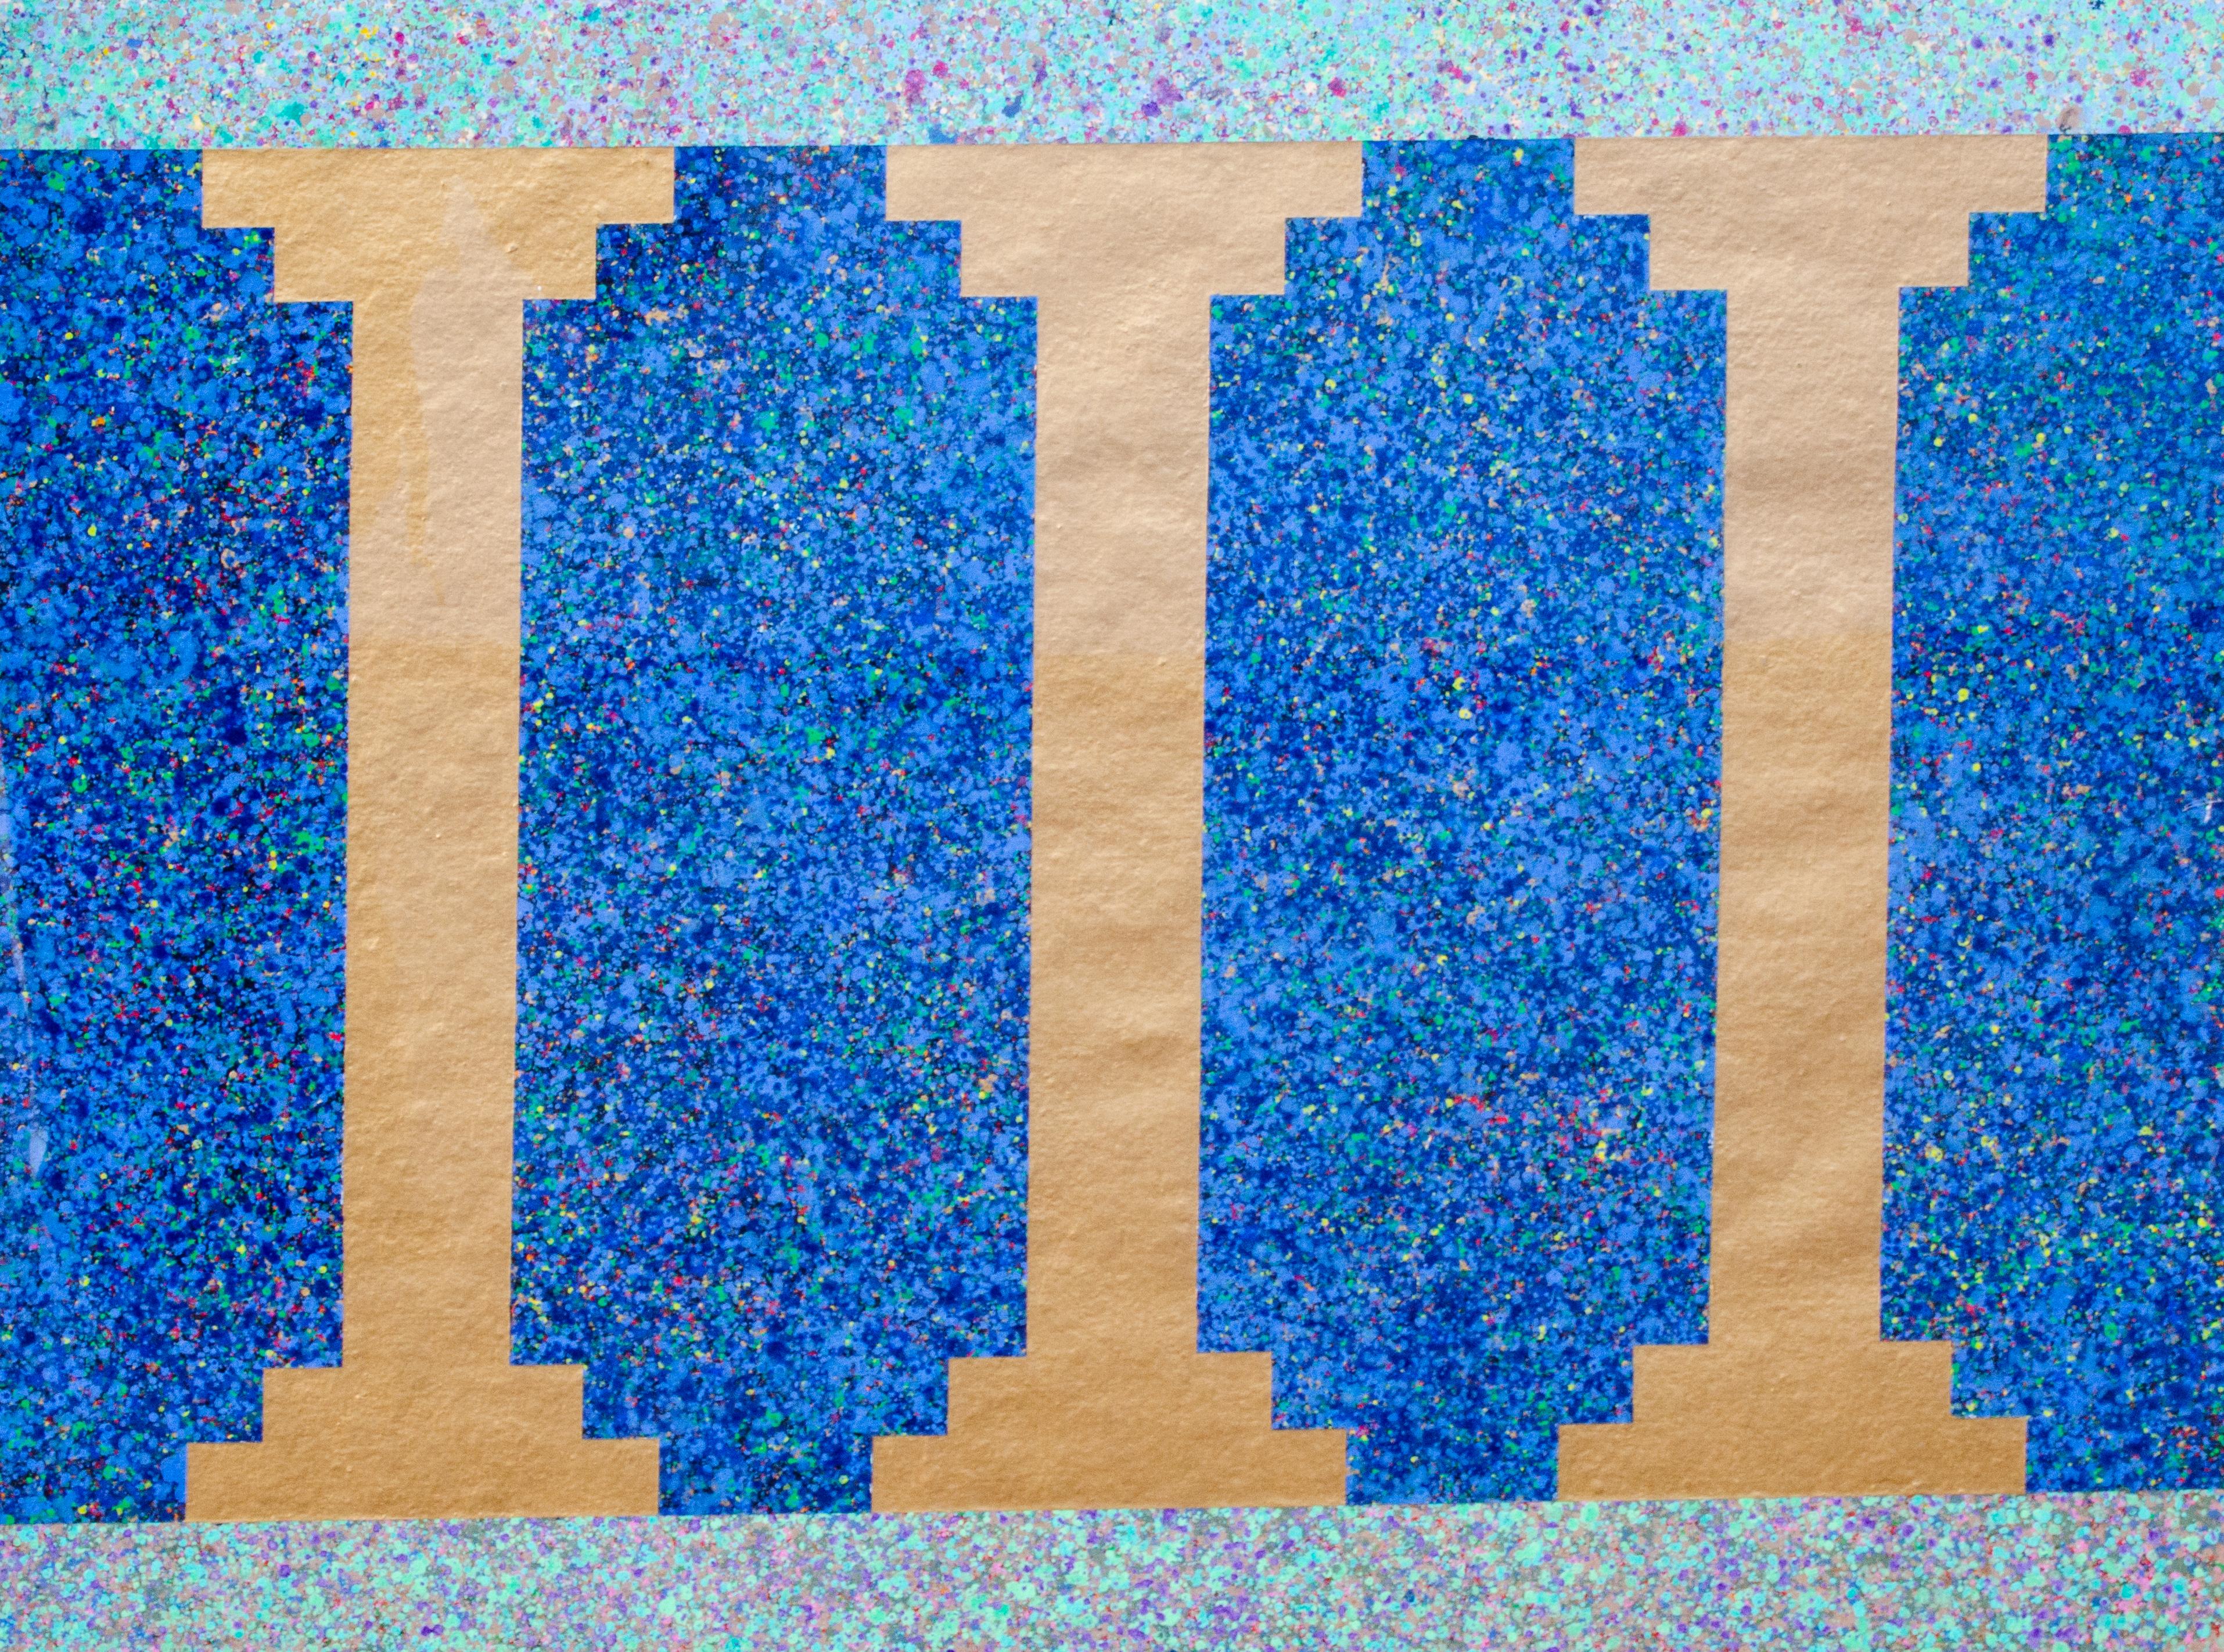 Adrianne Wortzel (b. 1941)
Gold Columns, 1987
Acrylic on paper
Sight: 22 x 30 in.
Framed: 27 x 34 1/2 x 1 1/2 in.
Signed and titled verso on stretcher bar


ADRIANNE WORTZEL'S early career focused mainly on abstract painting. During this time she